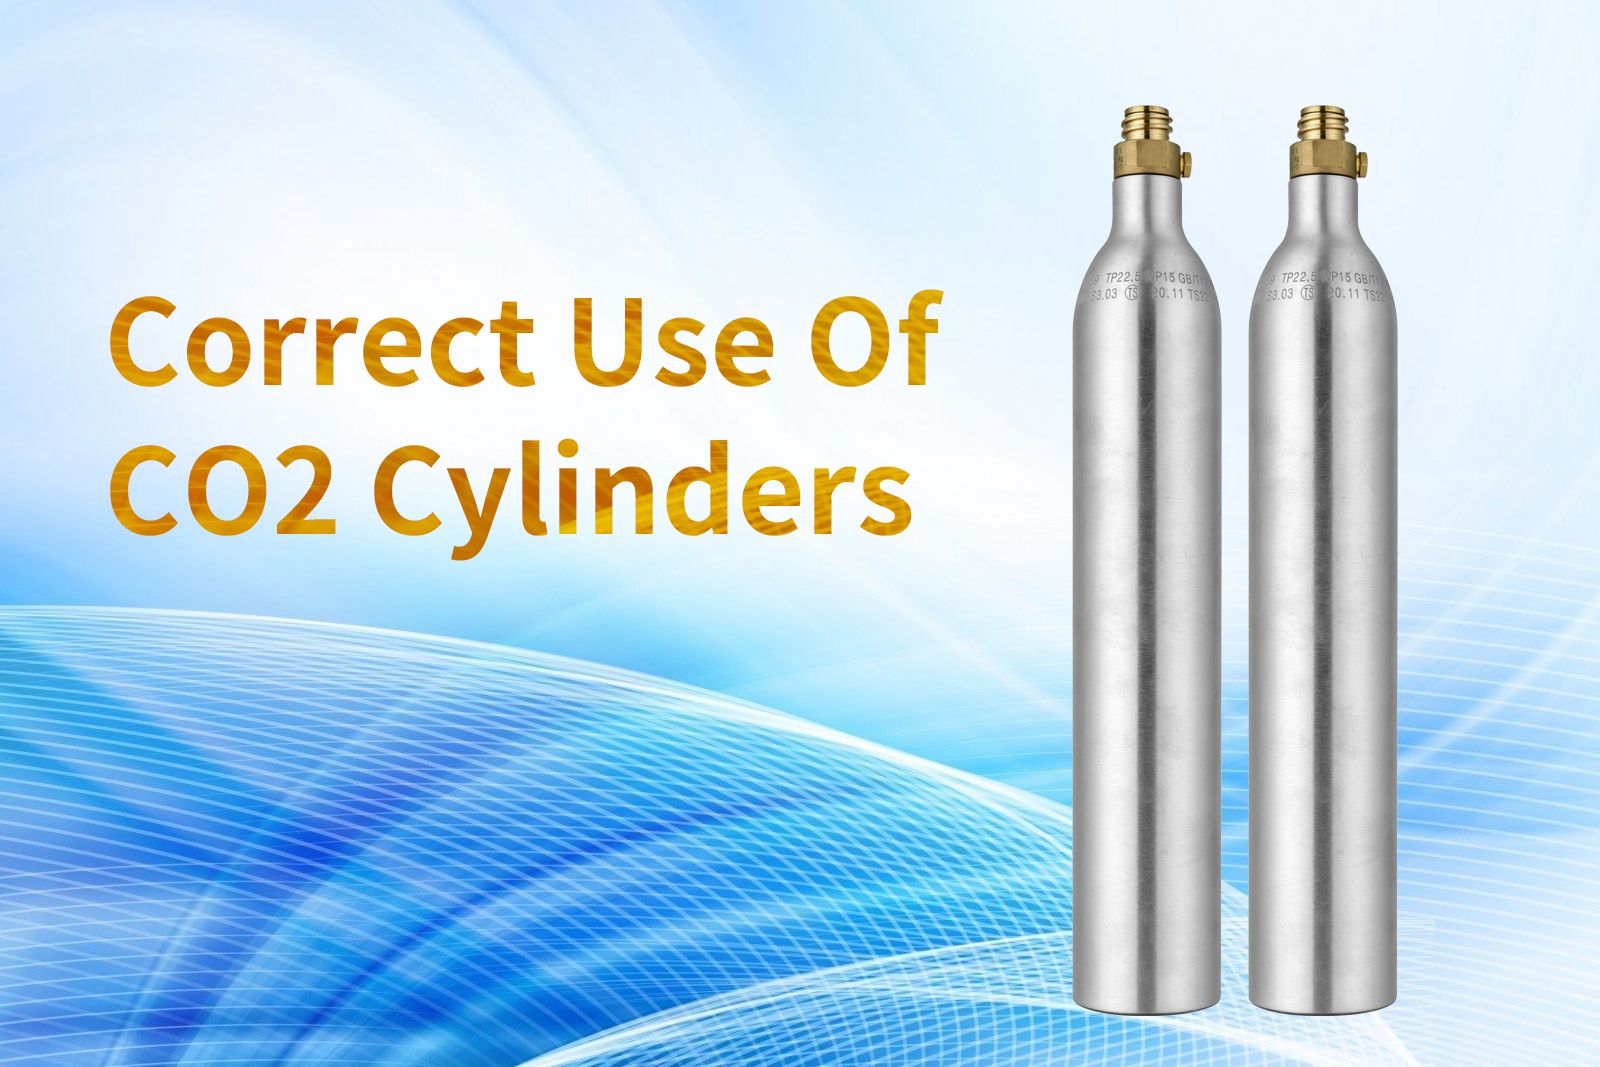 CO2 cylinders